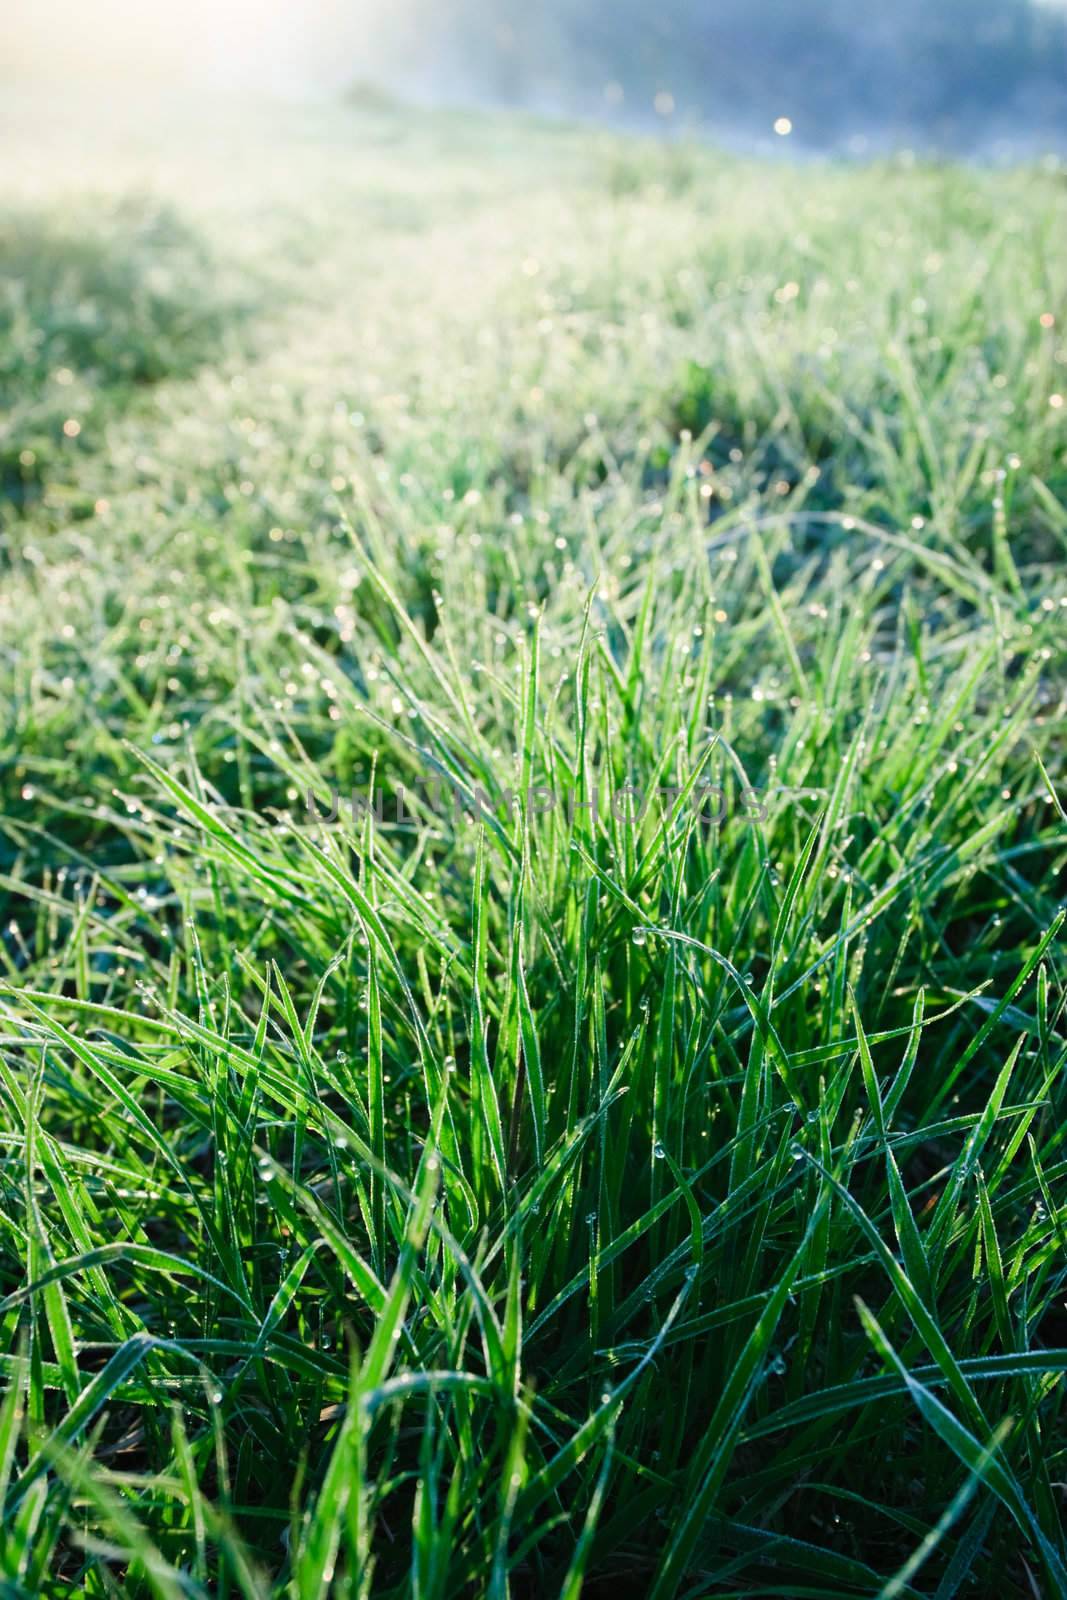 Grass with rime and dew drops in a morning light, selective focus